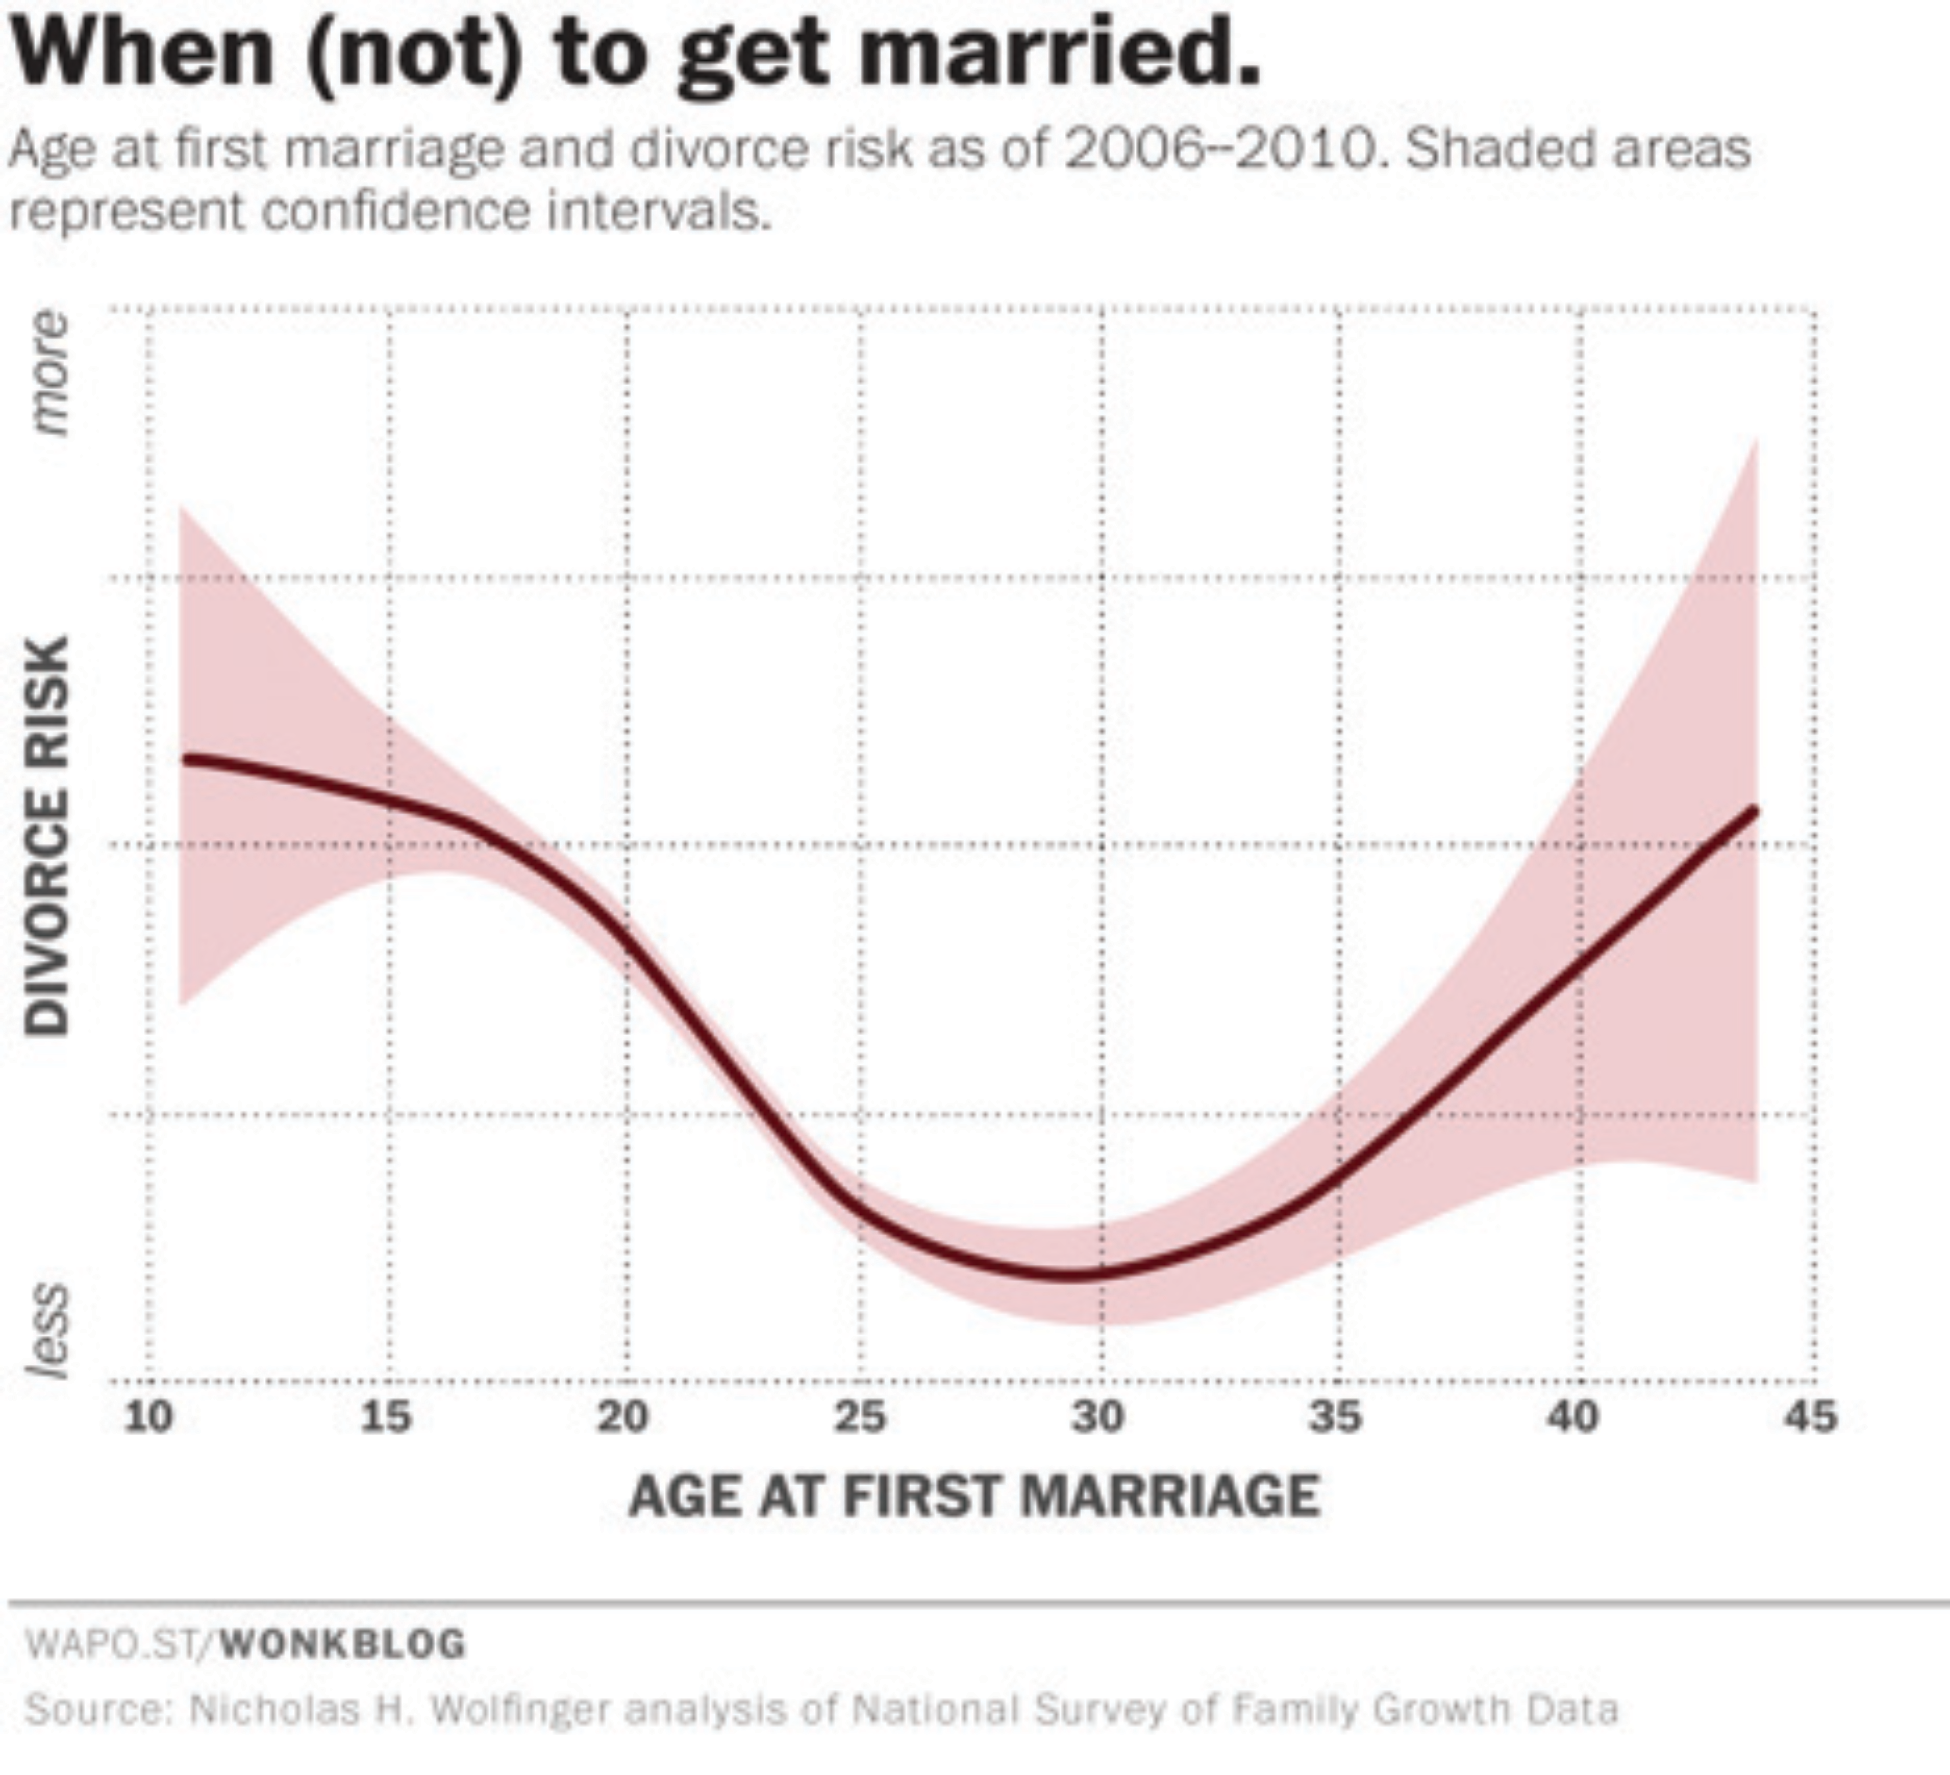 Does When You Marry Affect Your Chances of Divorce?